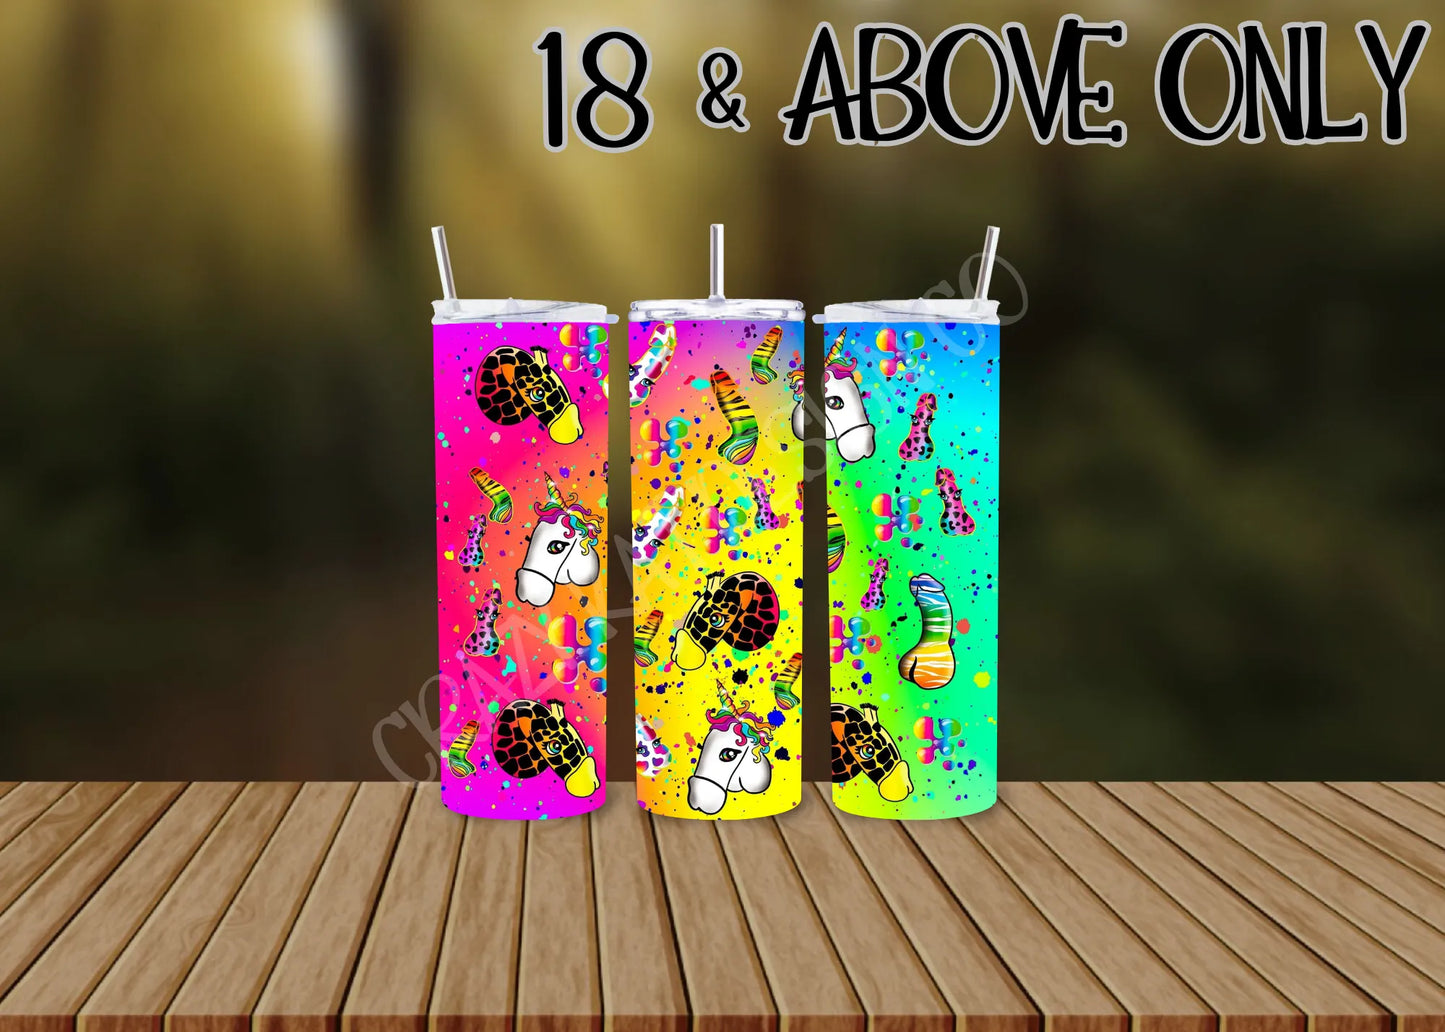 18+ ONLY CUSTOMIZABLE LISA FRANK D*CK HOT AND COLD TUMBLERS - Crazy Kat Design Co